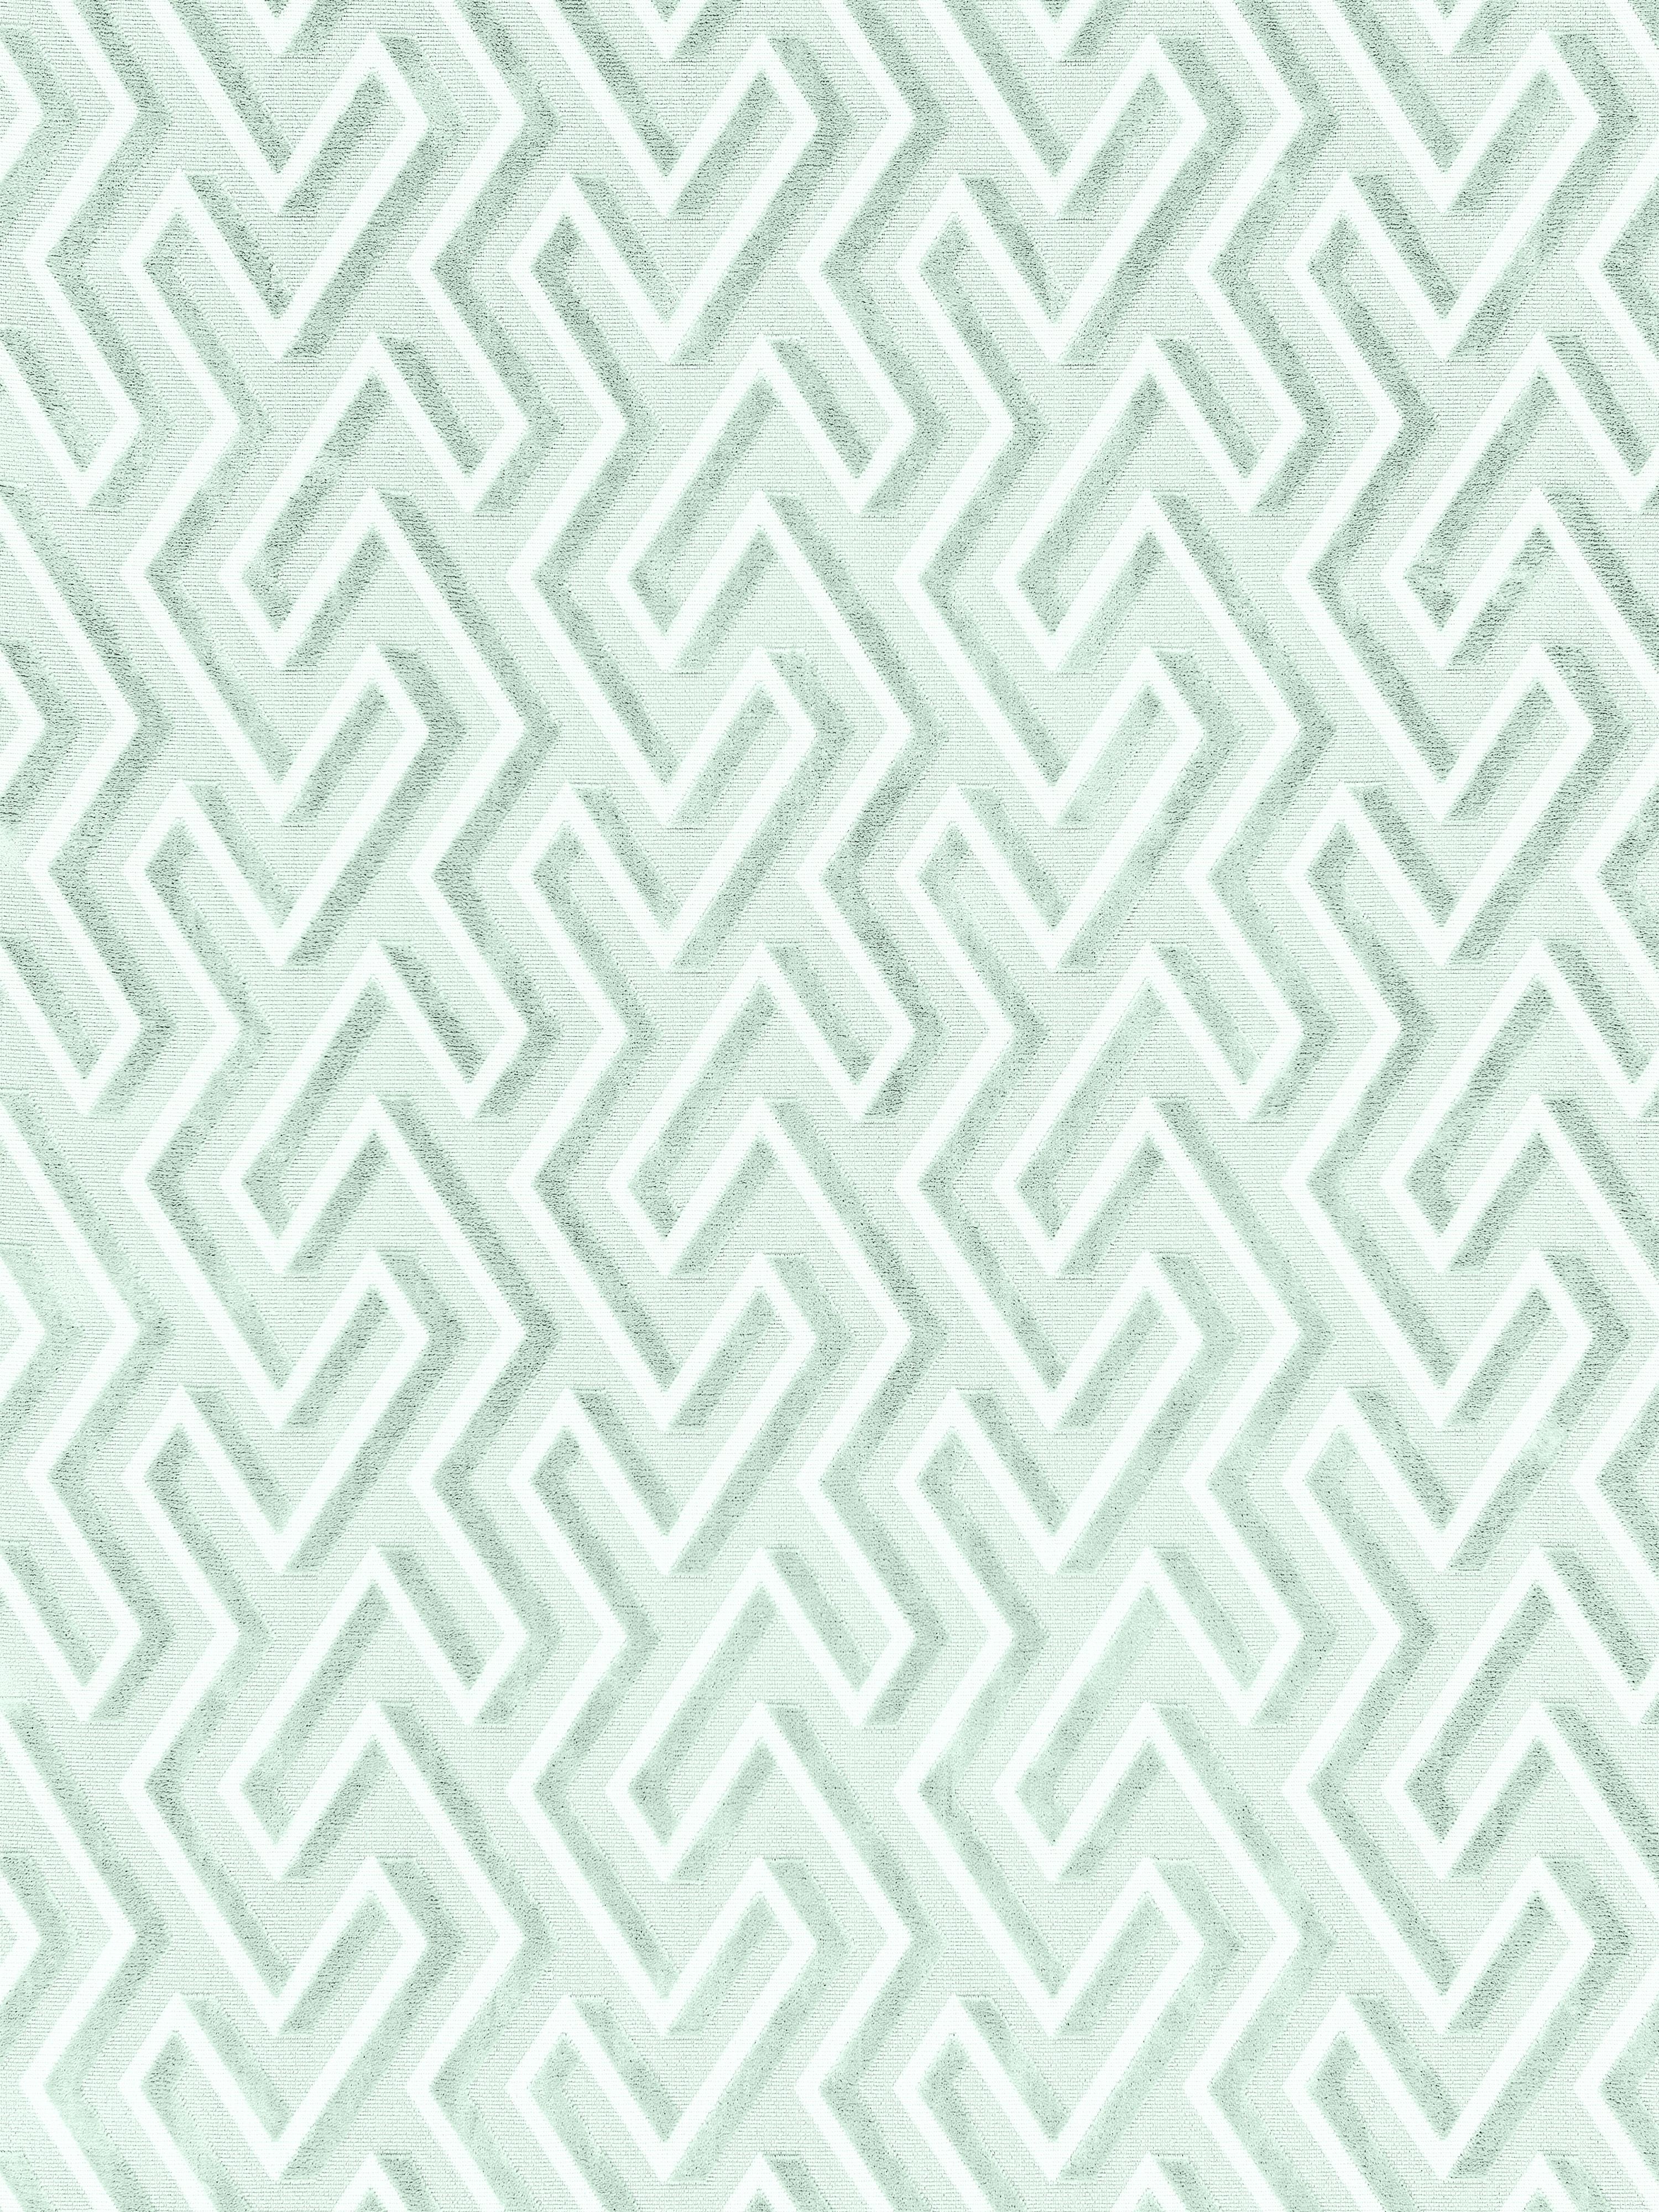 Maze Velvet fabric in harbor color - pattern number SC 000227237 - by Scalamandre in the Scalamandre Fabrics Book 1 collection